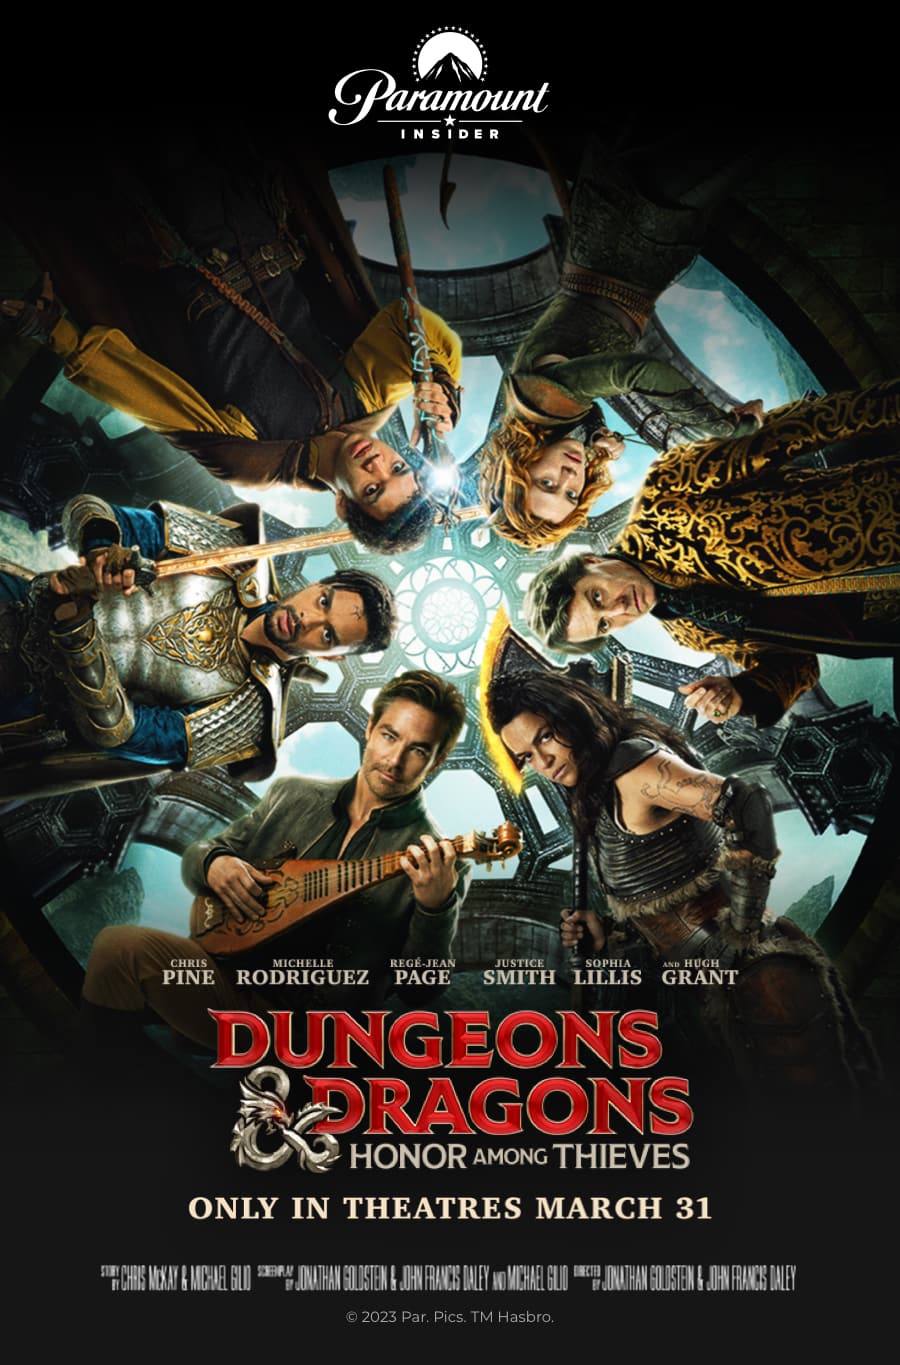 Dungeons And Dragons movie preview